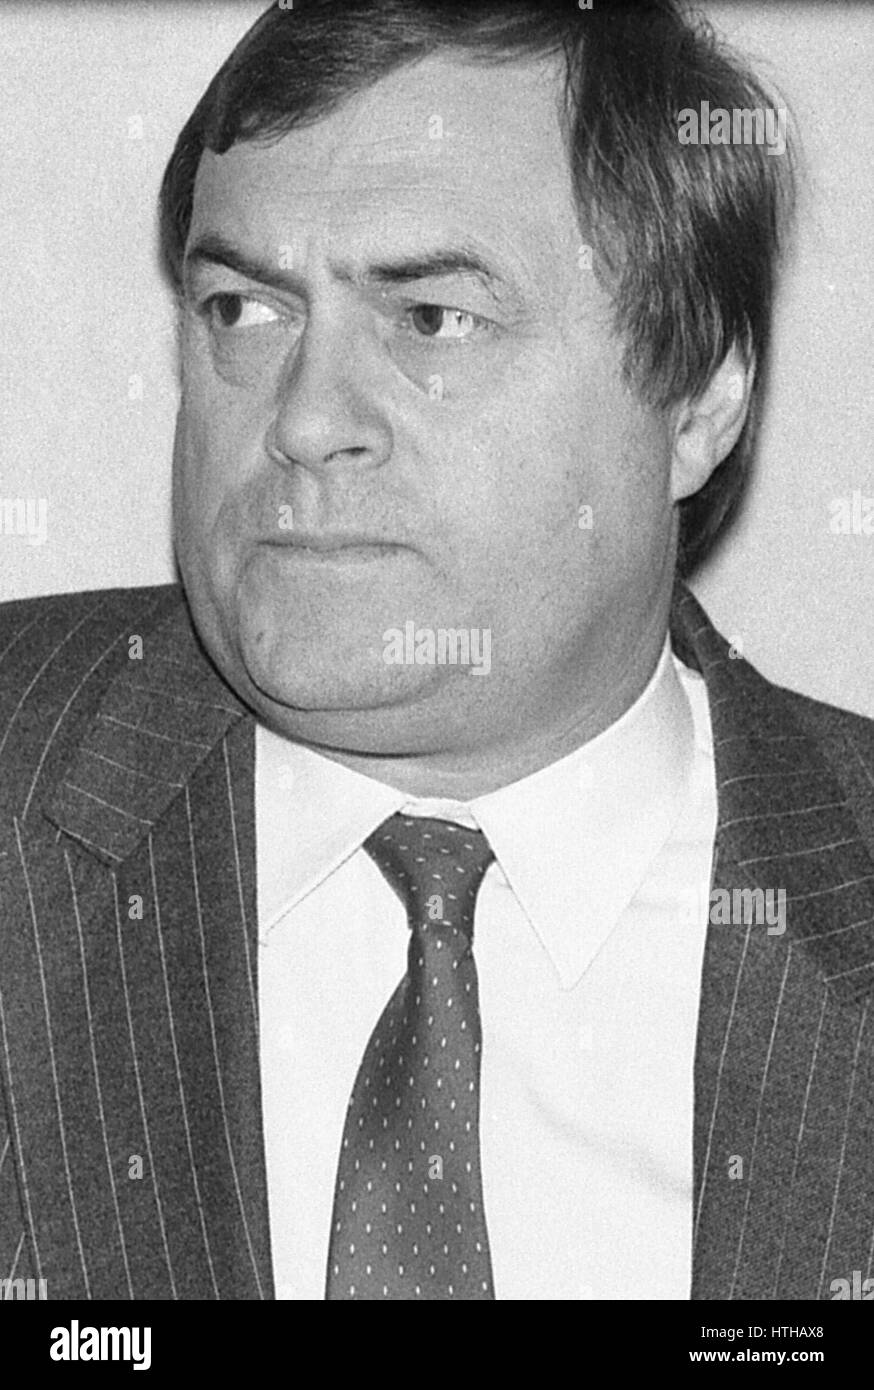 John Prescott, Labour party Member of Parliament for Kingston-upon-Hull East, attends a party poliy launch in London, England on May 24, 1990. Stock Photo